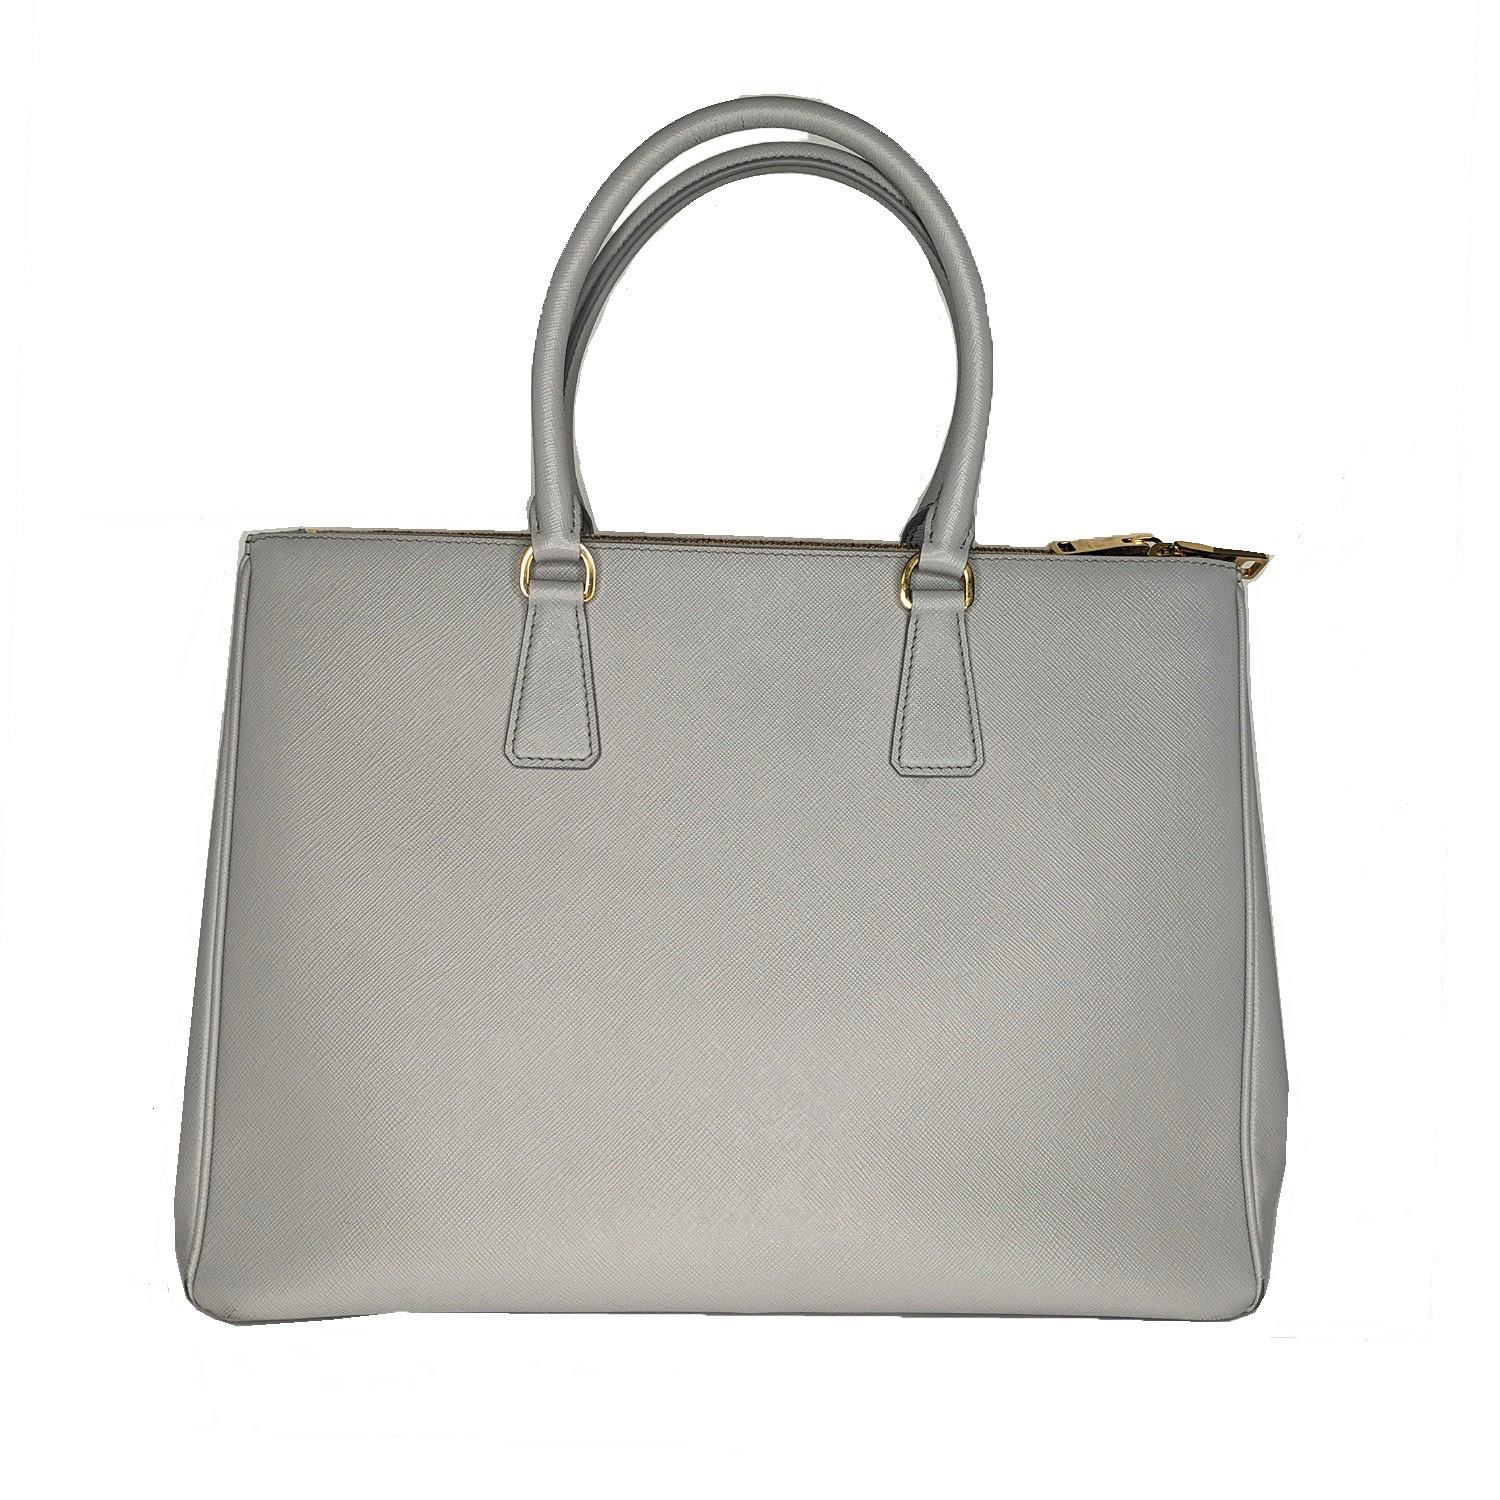 This stunning Prada Saffiano Lux Leather Galleria Tote Bag 1BA786 is one sophisticated piece. This durable and spacious tote features a structured tote shape in Saffiano lux leather and silvertone hardware. The bag comes with a long strap and a